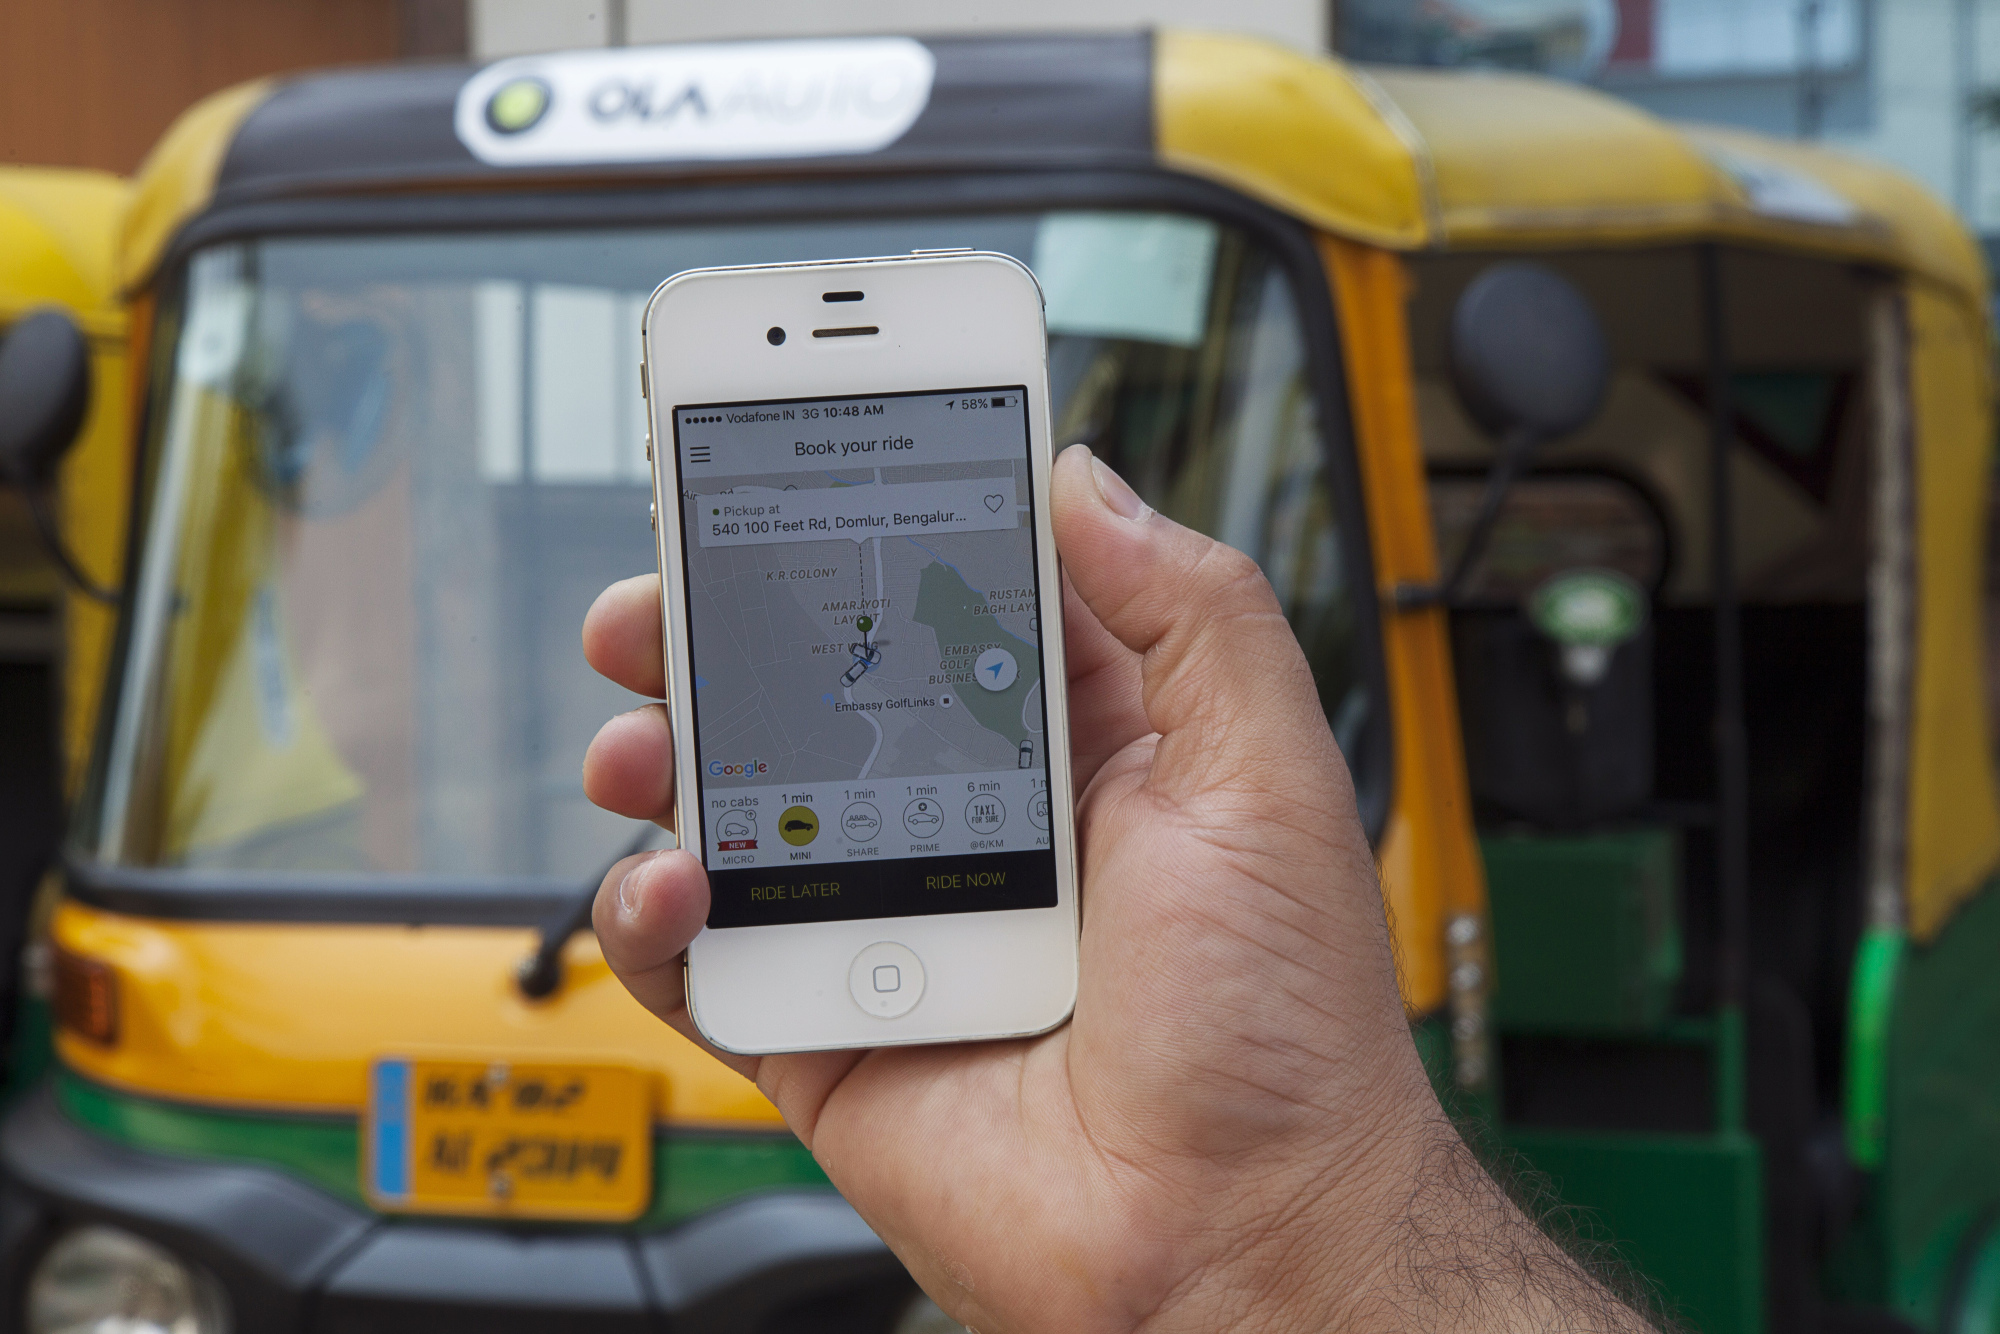 The app of ride-hailing service Ola, owned by ANI Technologies Pvt., is displayed in Bengaluru, India.